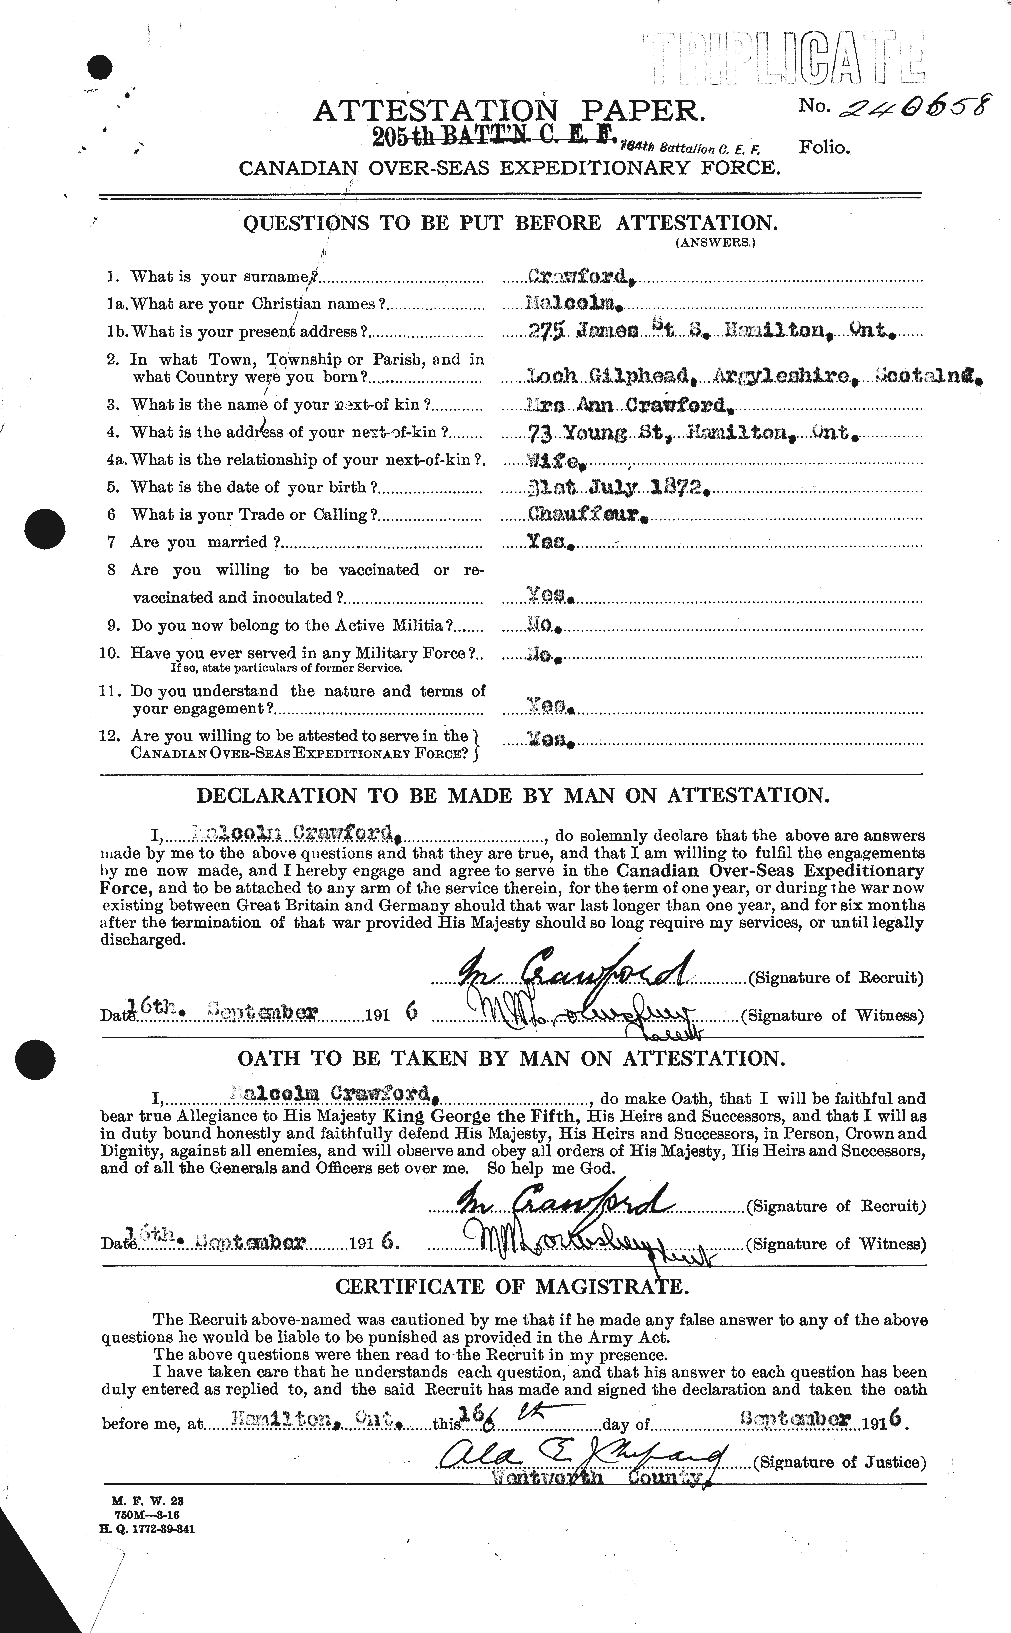 Personnel Records of the First World War - CEF 061786a